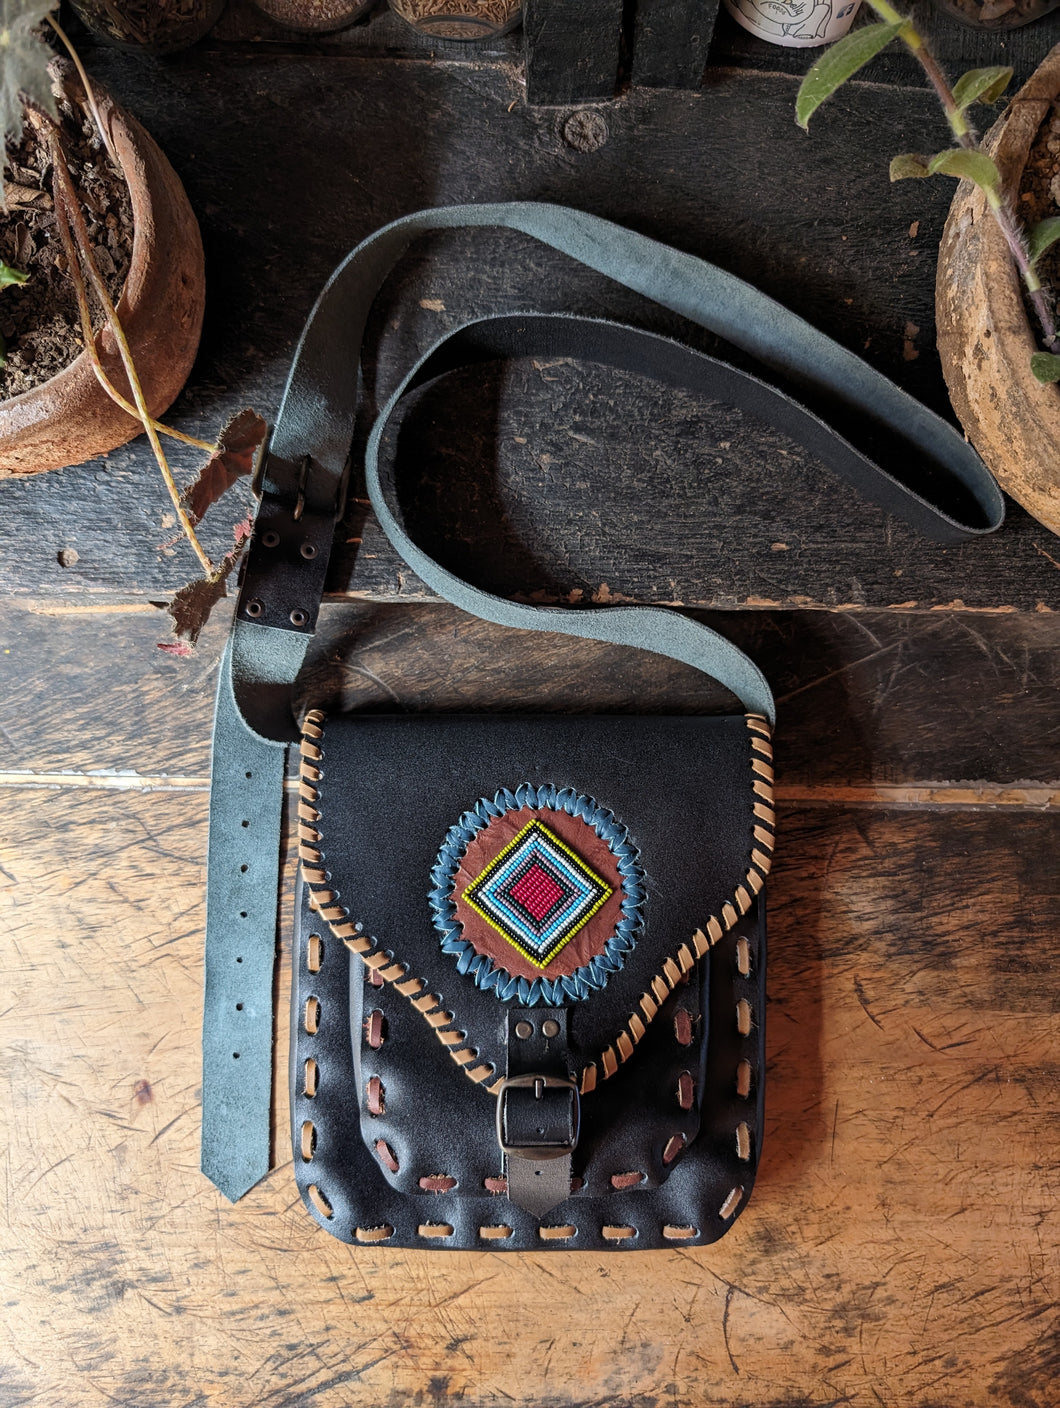 Beaded leather bag #1